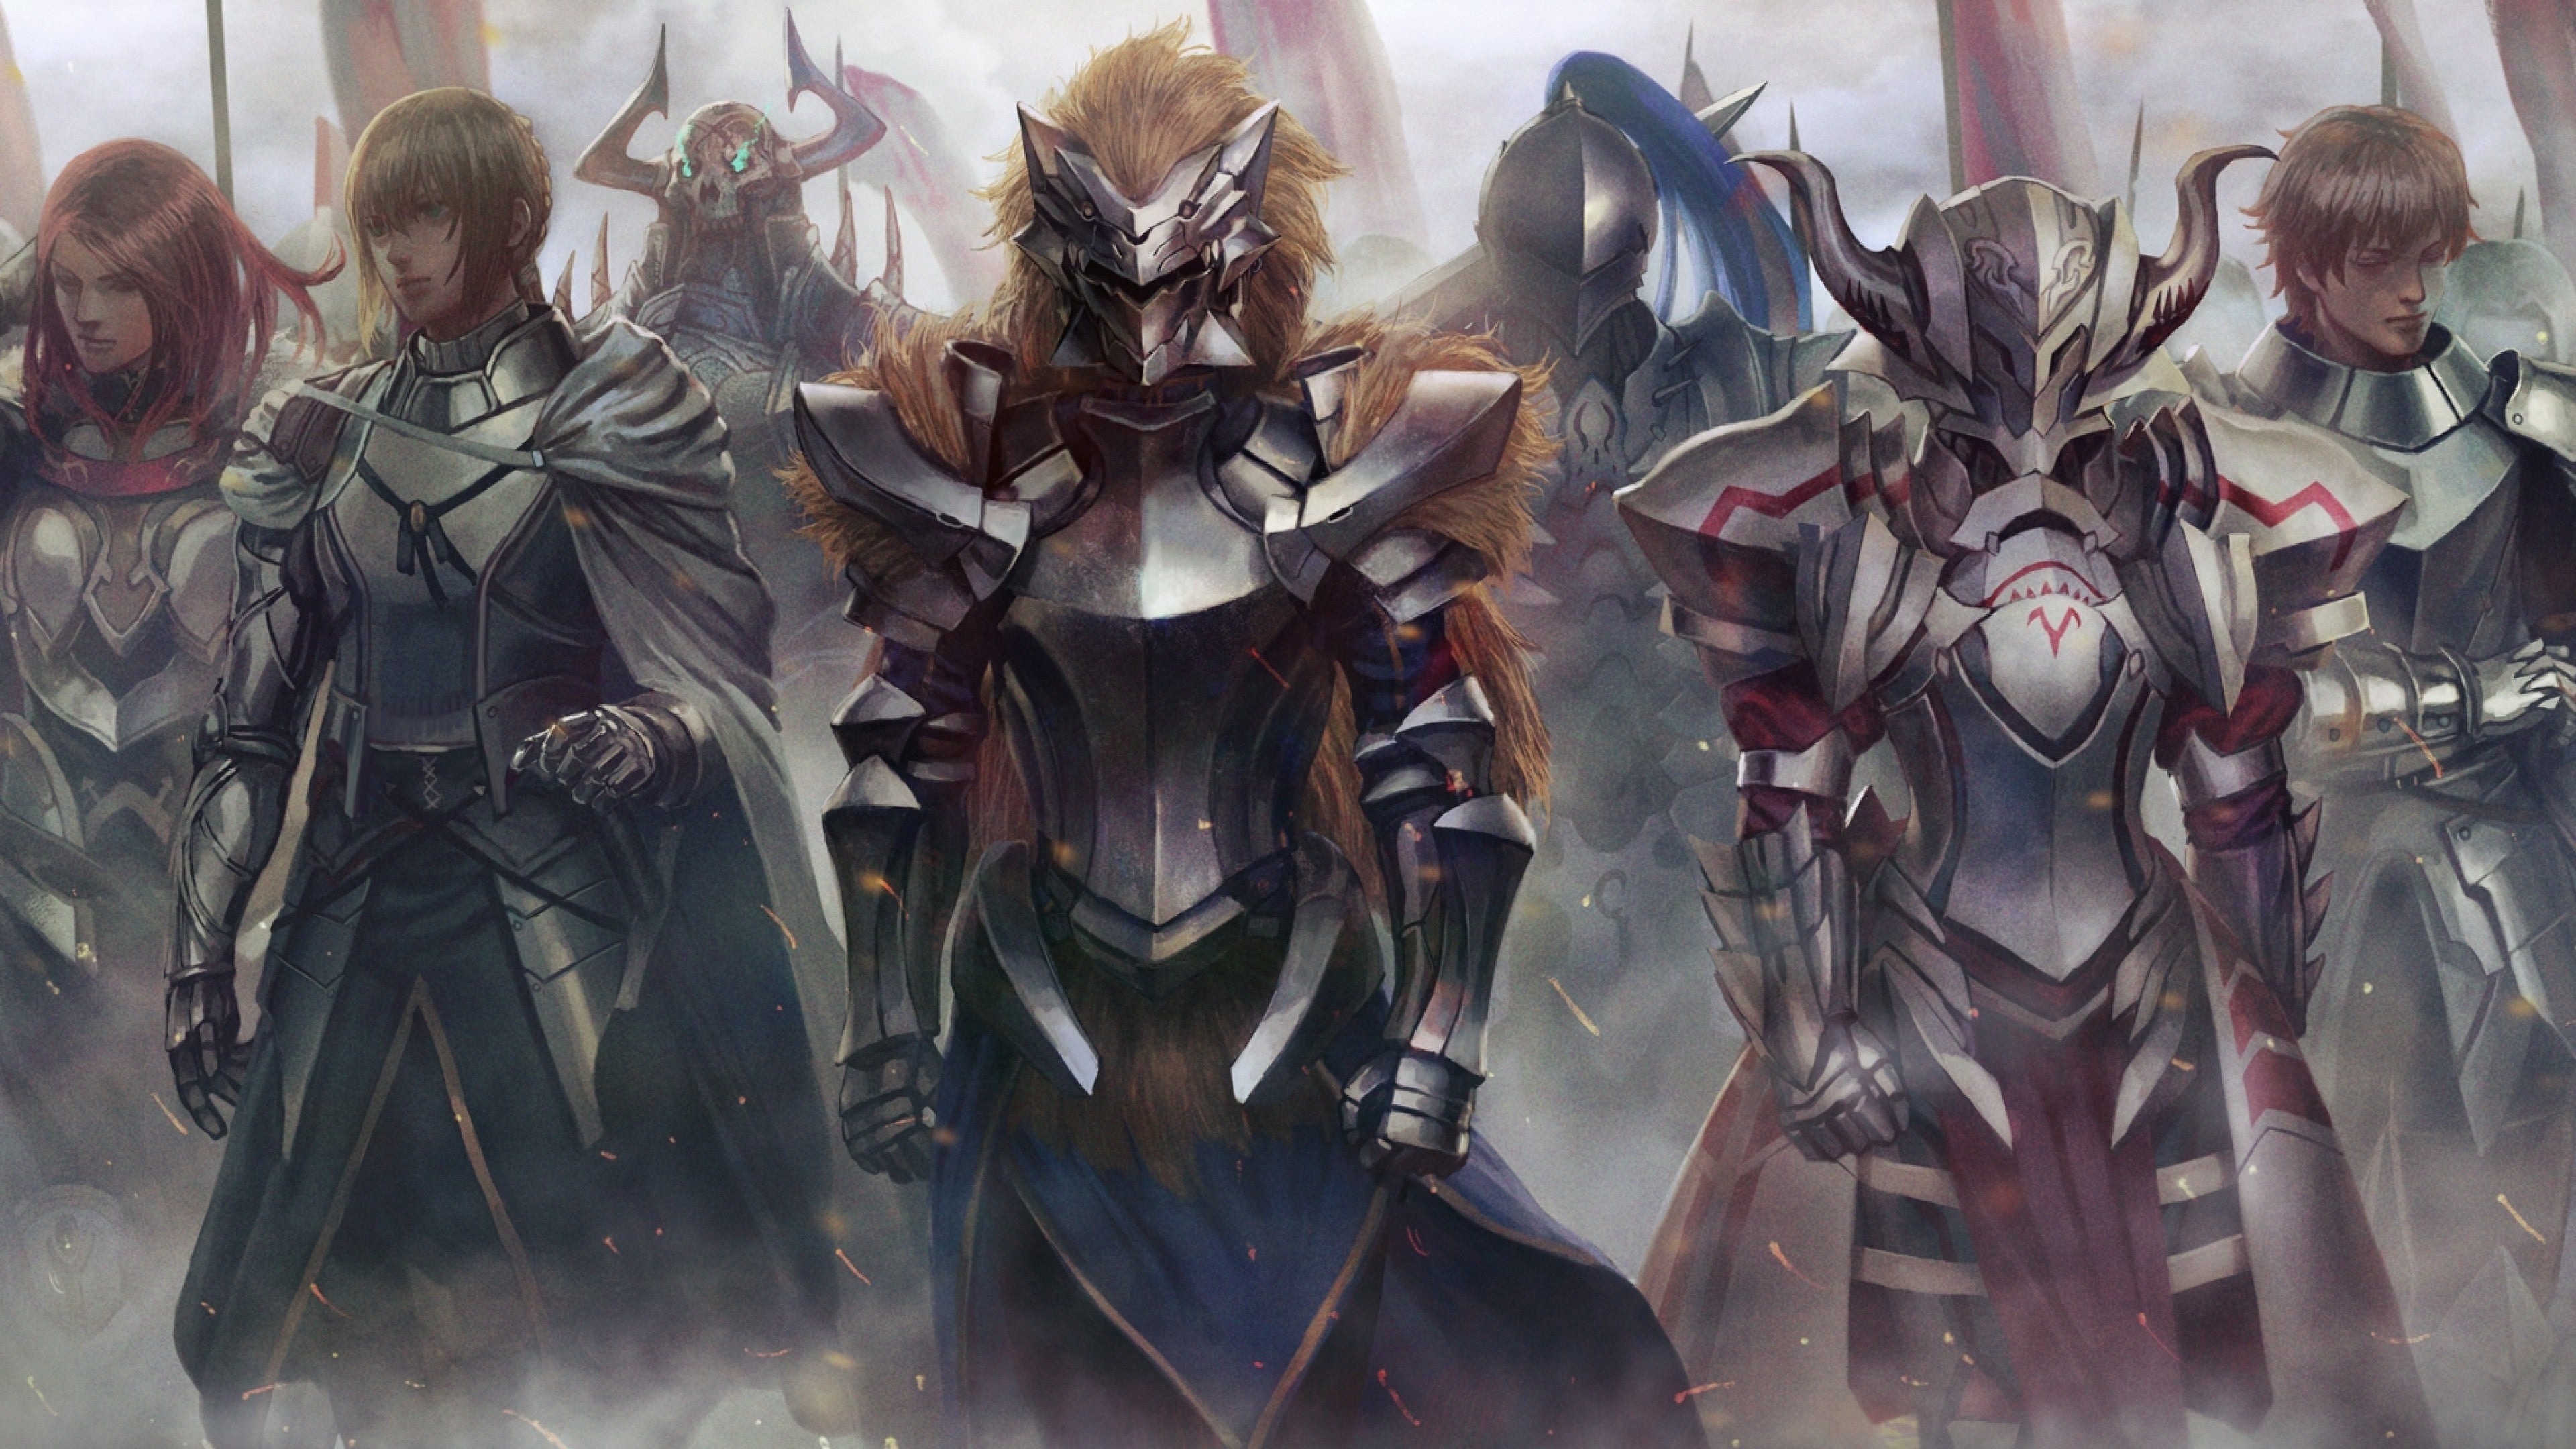 Anime 3840x2160 Fate series armor helmet knight Mordred (Fate/Apocrypha) Lancelot (Fate/Grand Order) Artoria Pendragon (Lancer) Artoria Pendragon Bedivere (Fate/Grand Order) Berserker (Fate/Zero) Gawain (Fate/Grand Order) King Hassan (Fate/Grand Order) Tristan (fate/Grand Order) Fate/Zero Fate/Extra Fate/Apocrypha  Fate/Grand Order